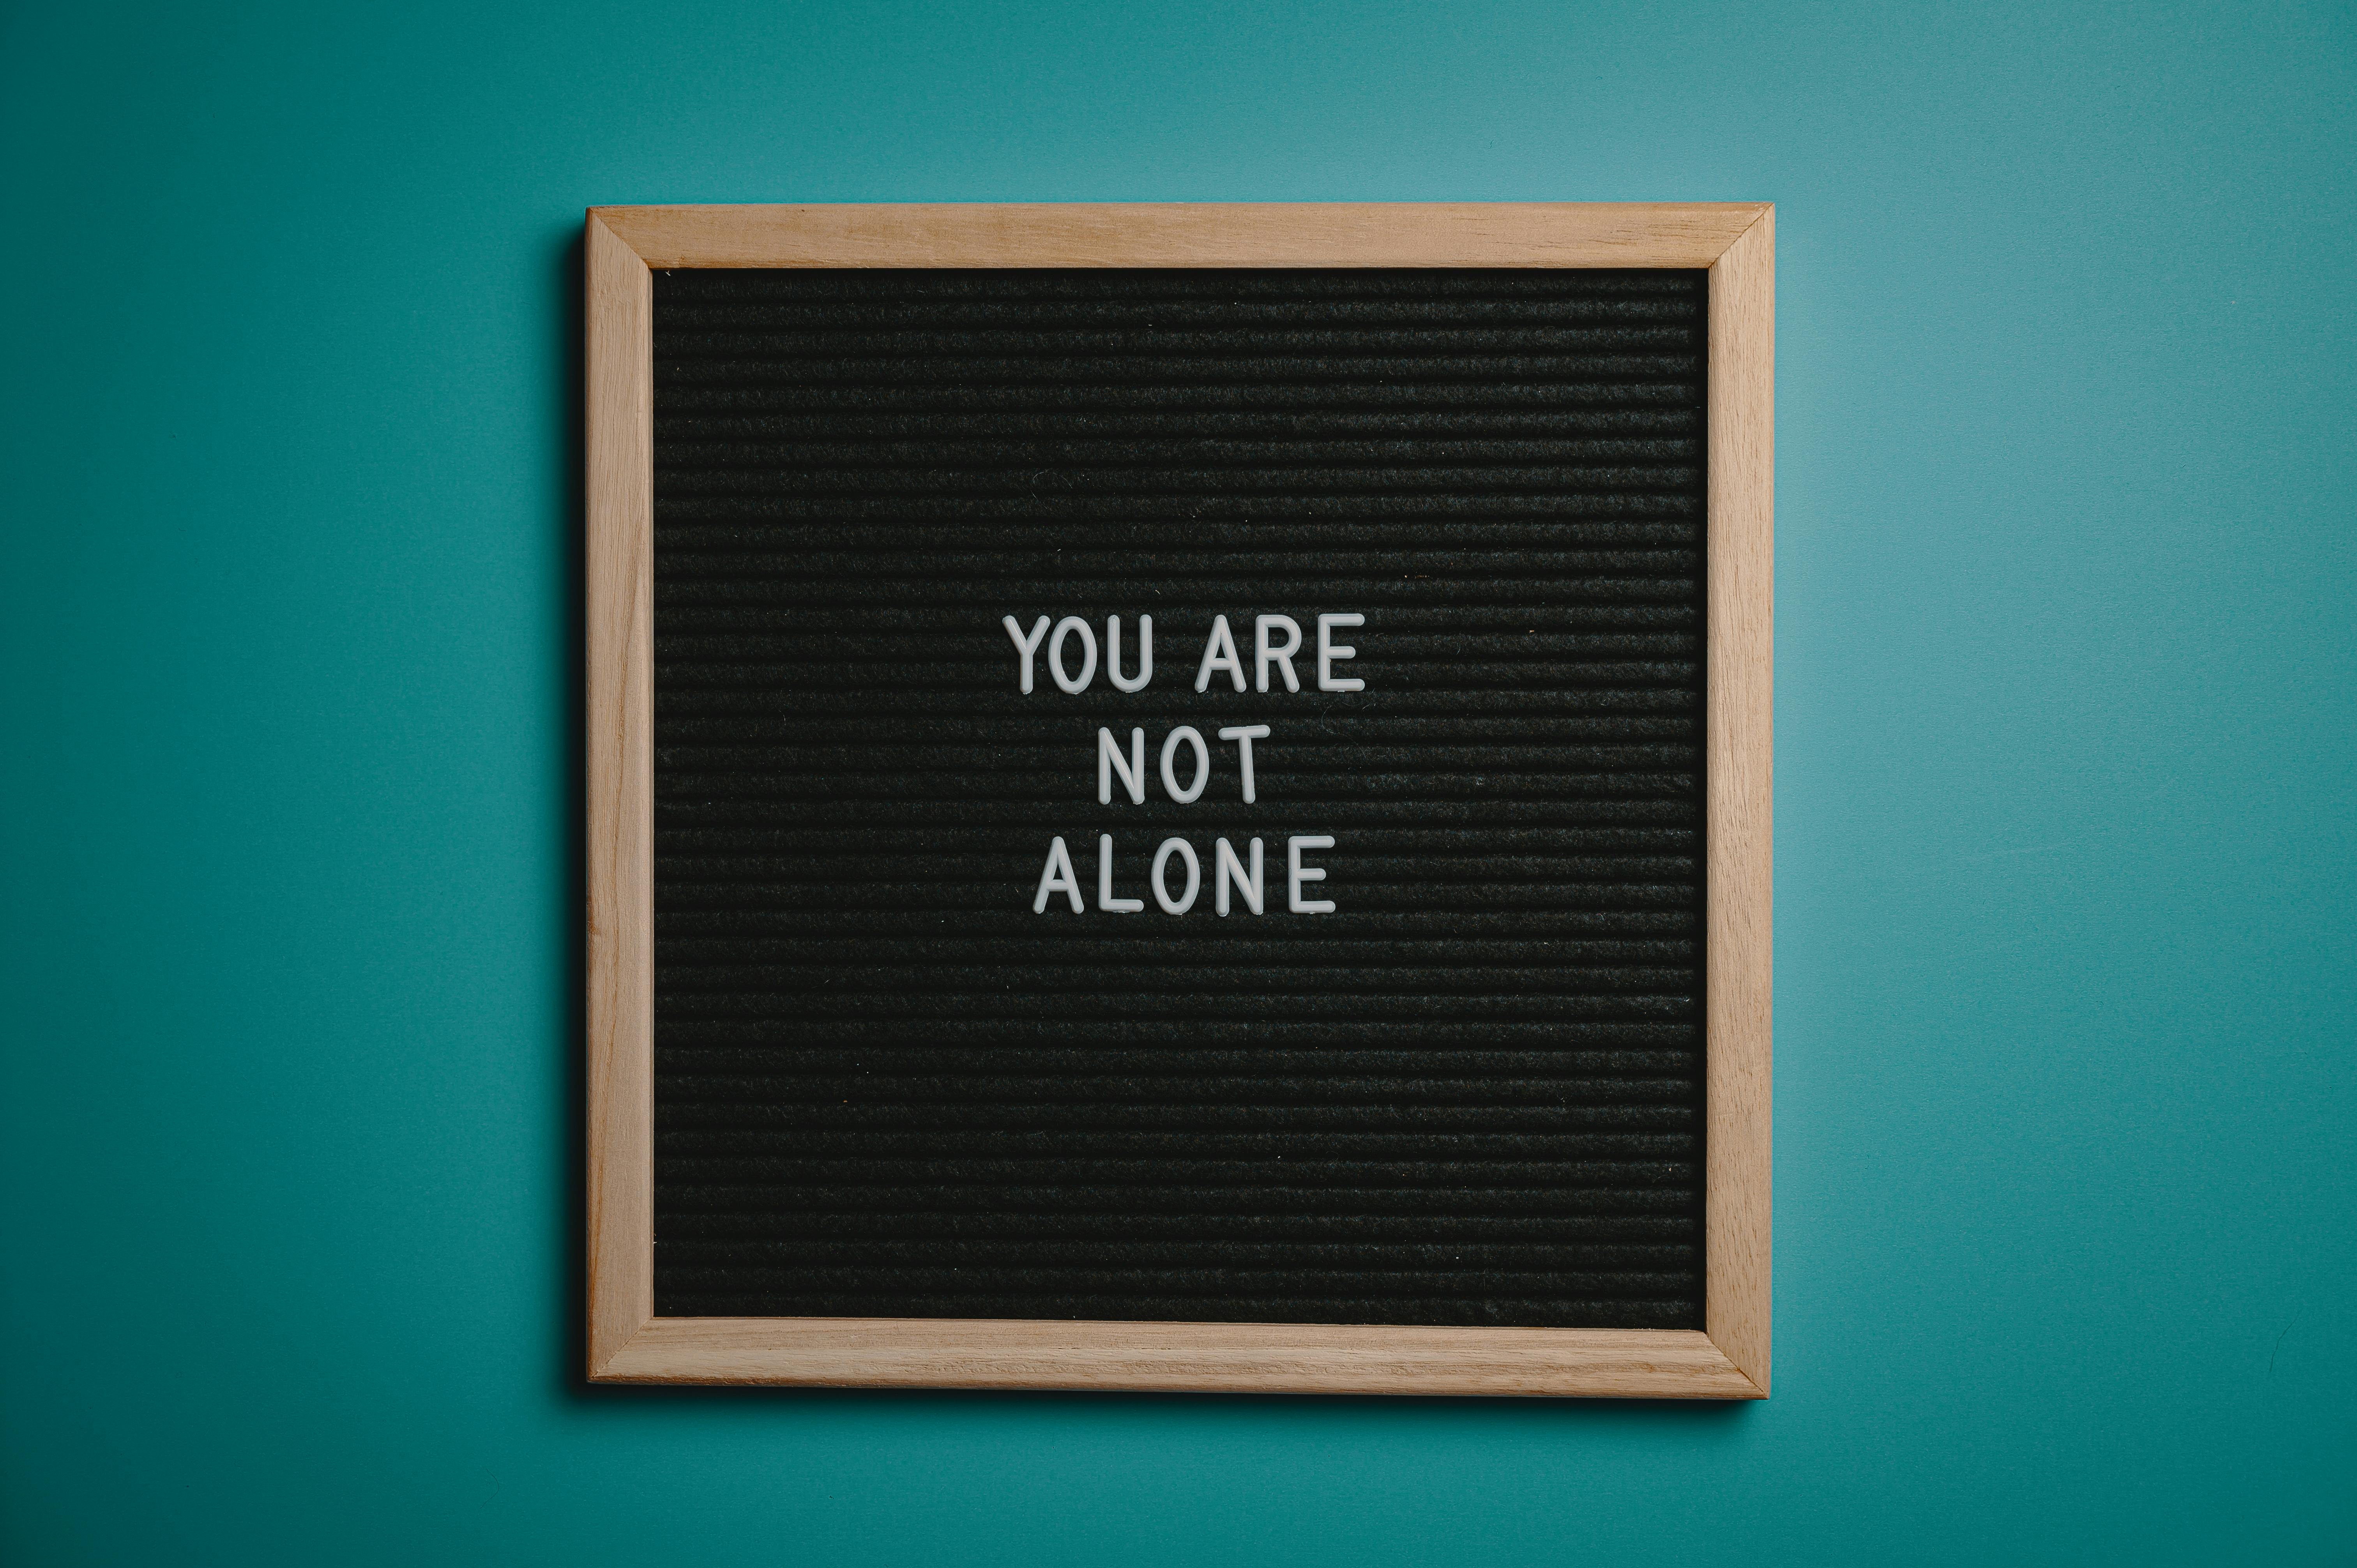 Lonely Quotes to Help Cope with the Feeling | Everyday Power